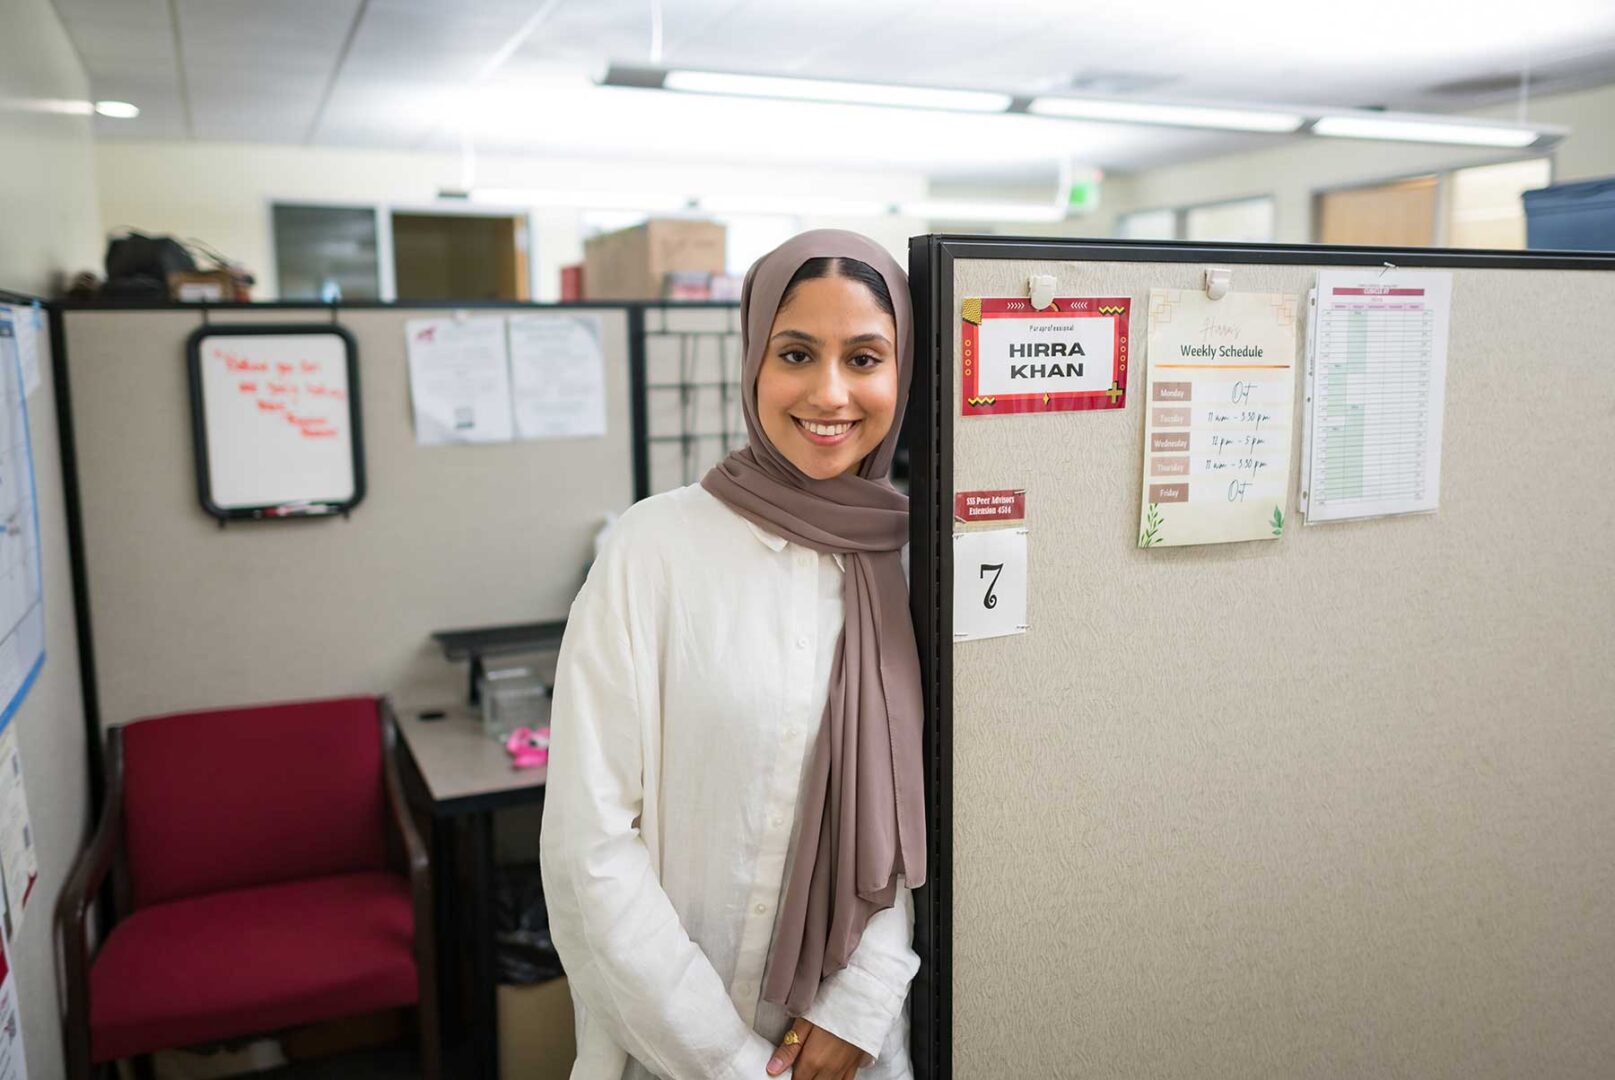 Hirra Khan is photographed outside of her cubicle office at the Educational Opportunity Program. She wears a shite cotton shirt and a tan hijab. 